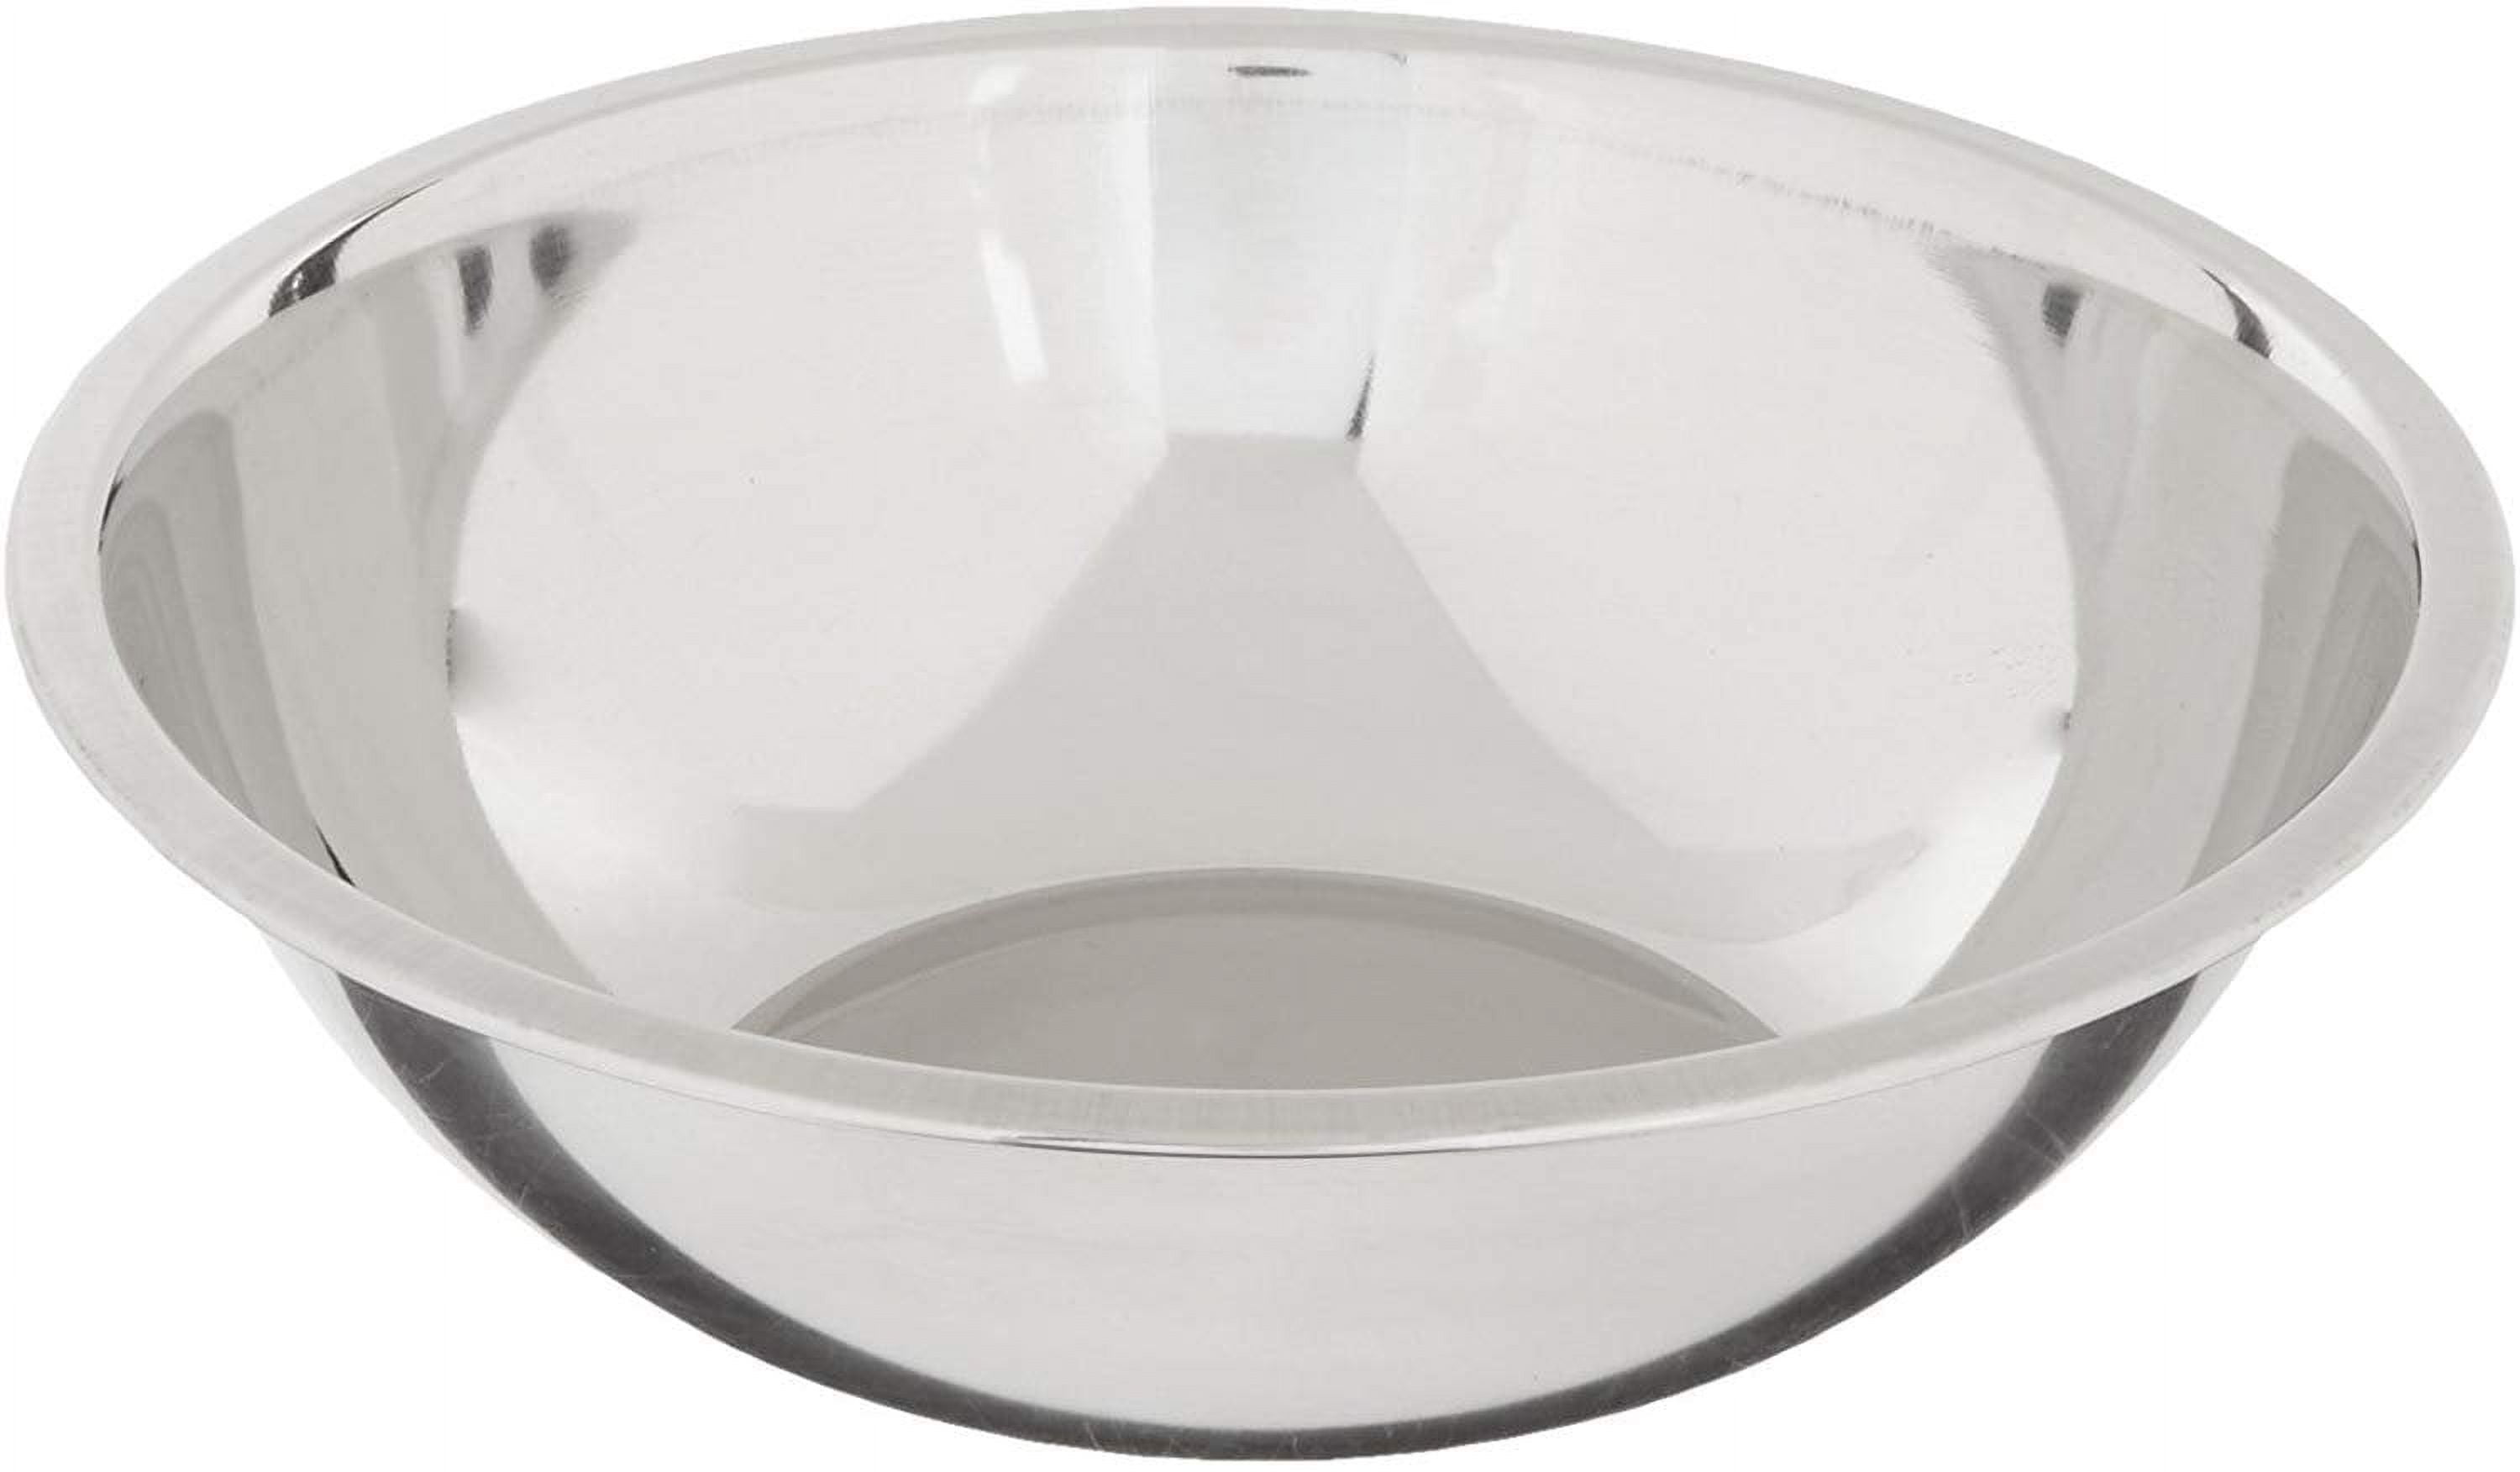 Winco - MXB-75Q - 3/4 qt Stainless Steel Mixing Bowl